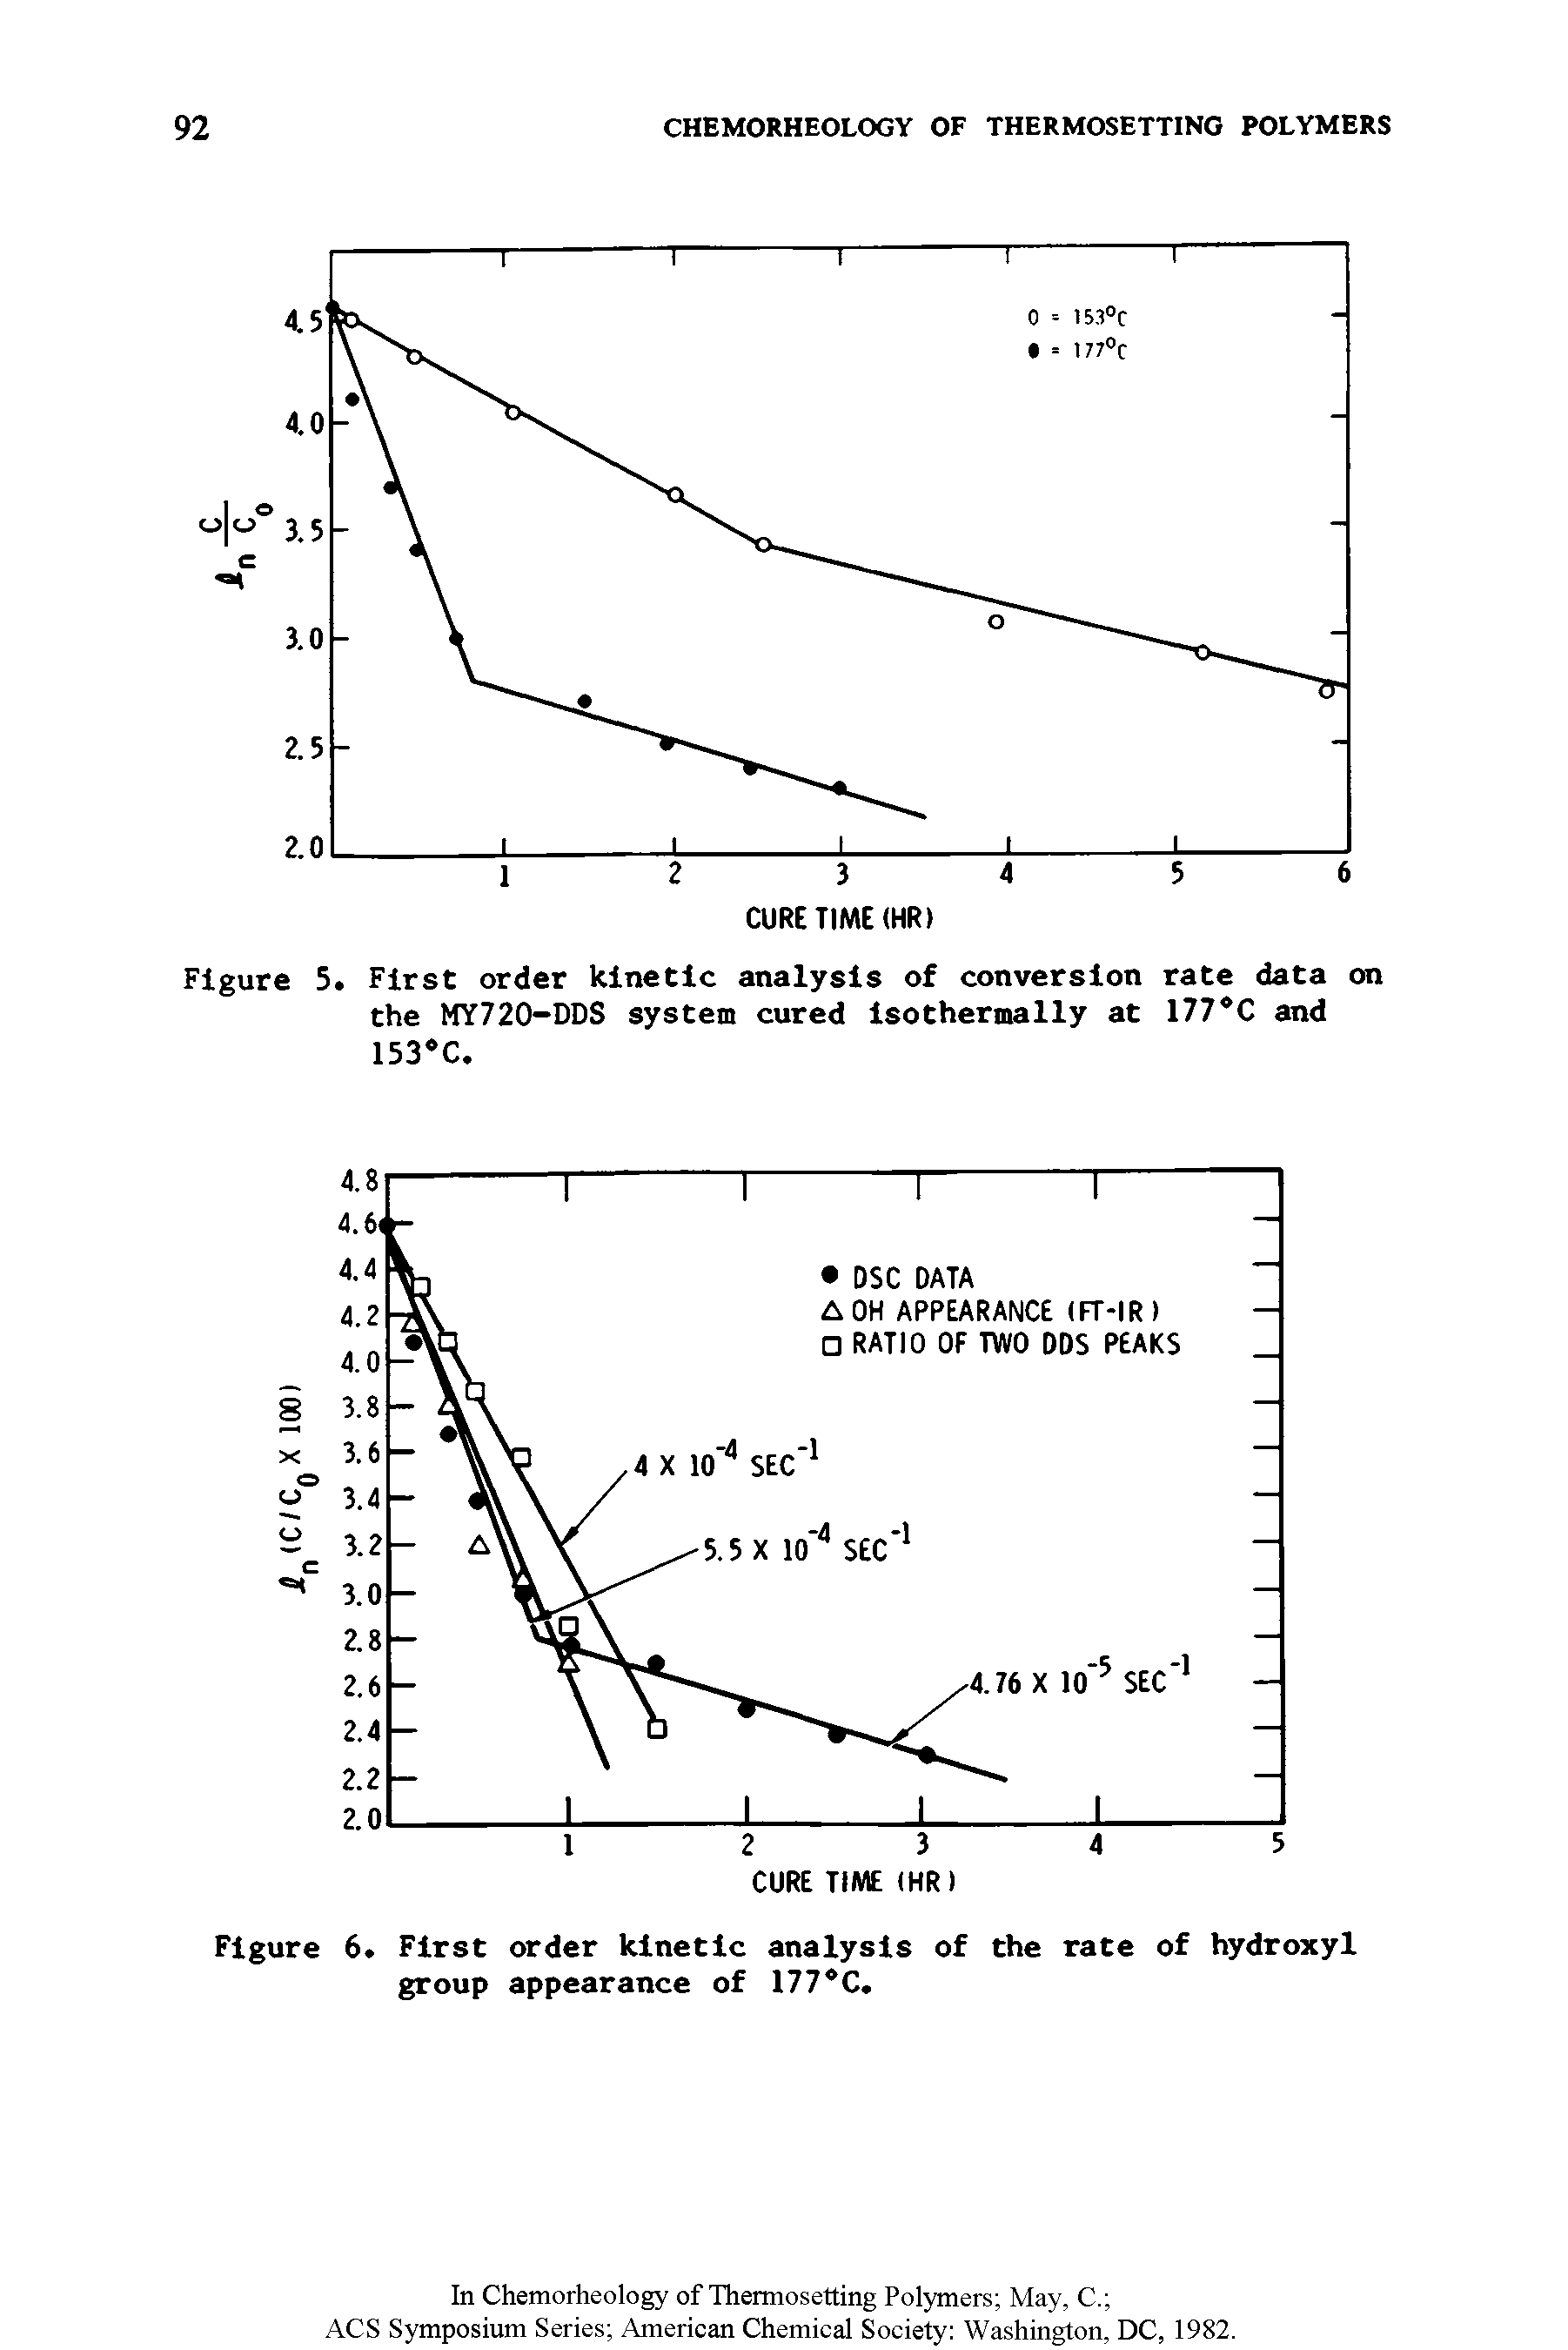 Figure 6. First order kinetic analysis of the rate of hydroxyl group appearance of 177 C.